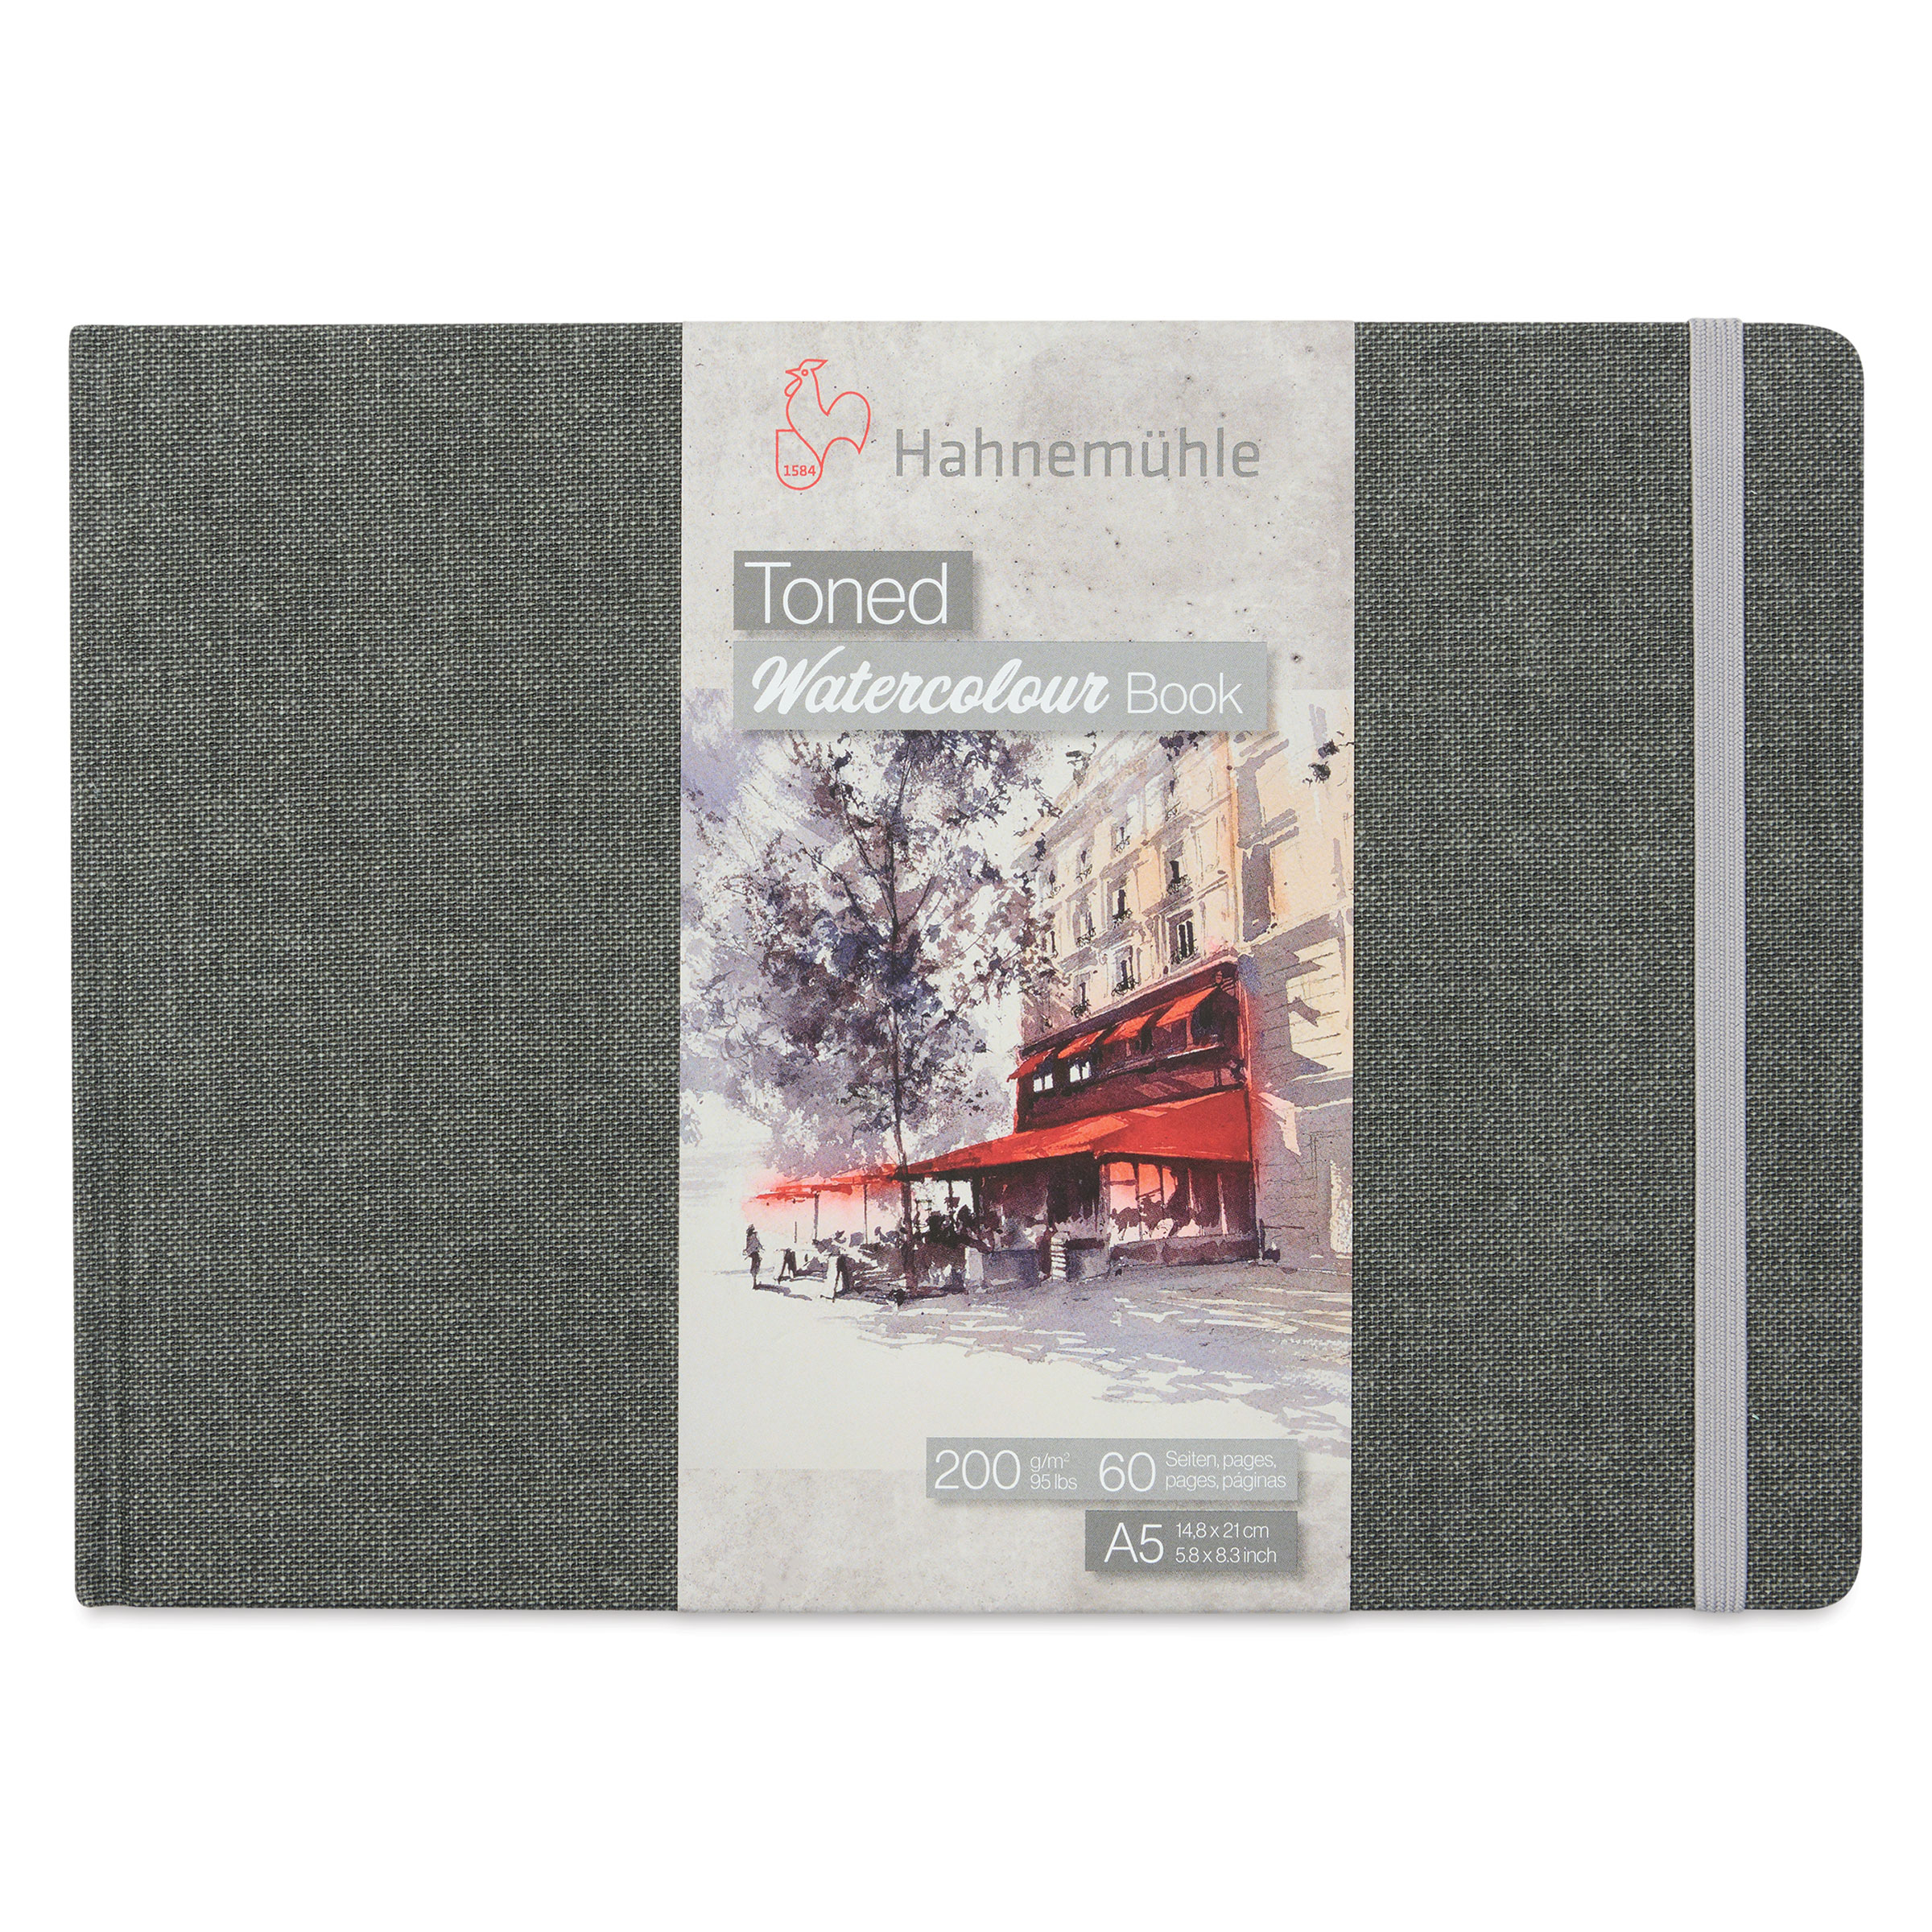 Hahnemuhle Toned Beige Watercolor Pad A5